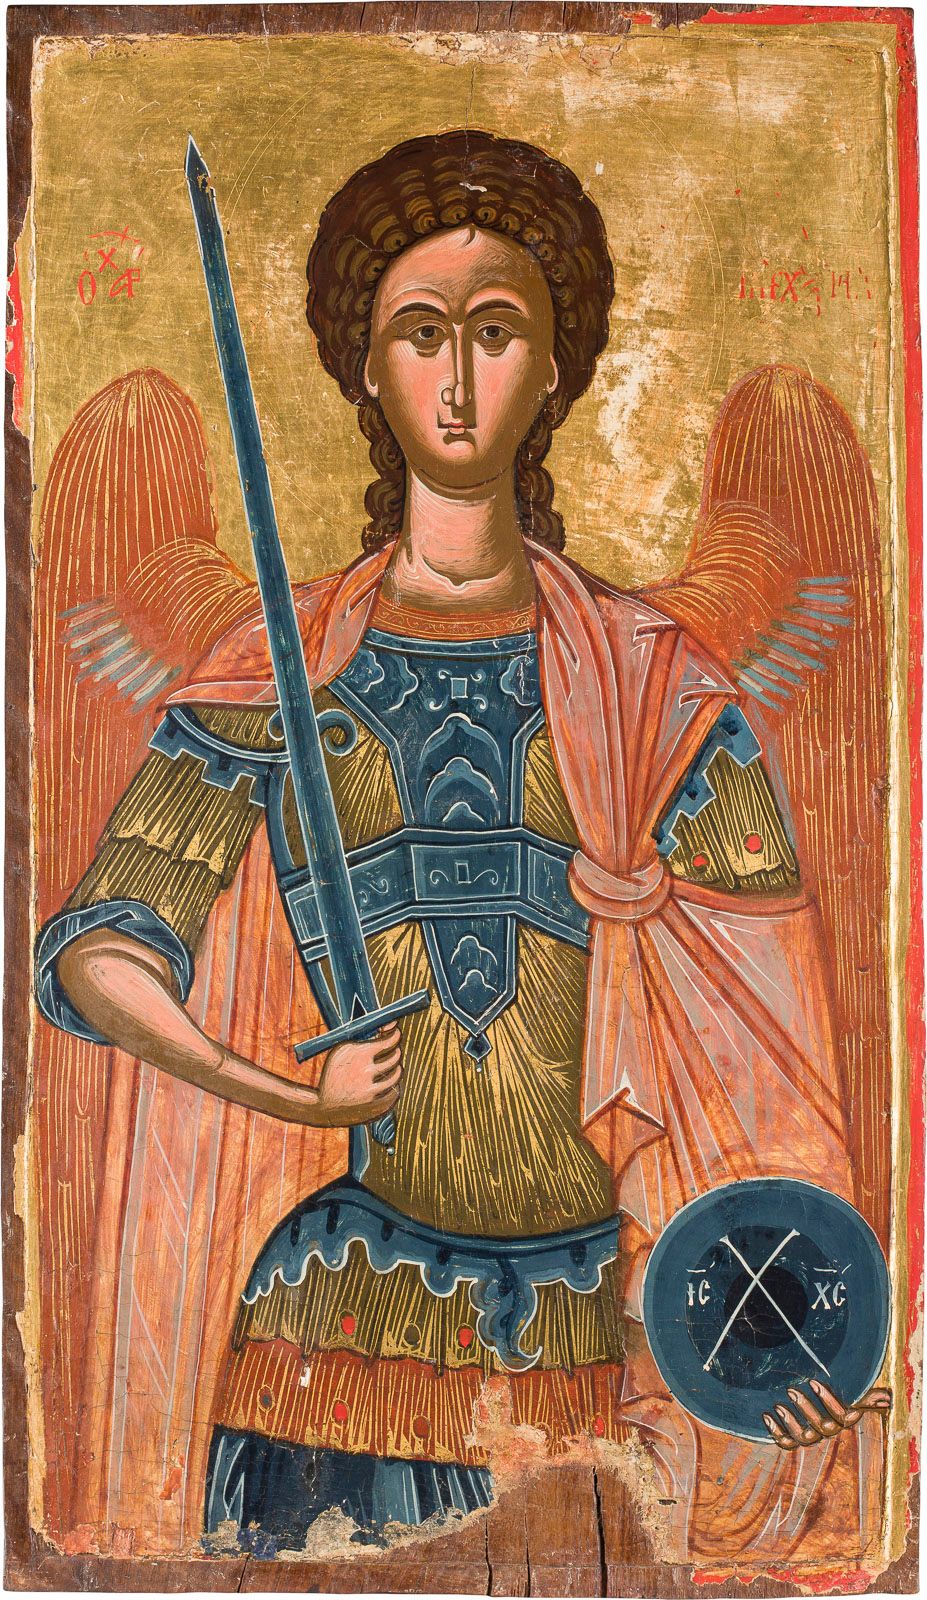 A MONUMENTAL ICON SHOWING THE ARCHANGEL MICHAEL ICONA MONUMENTALE DELL'ARCANGELO&hellip;